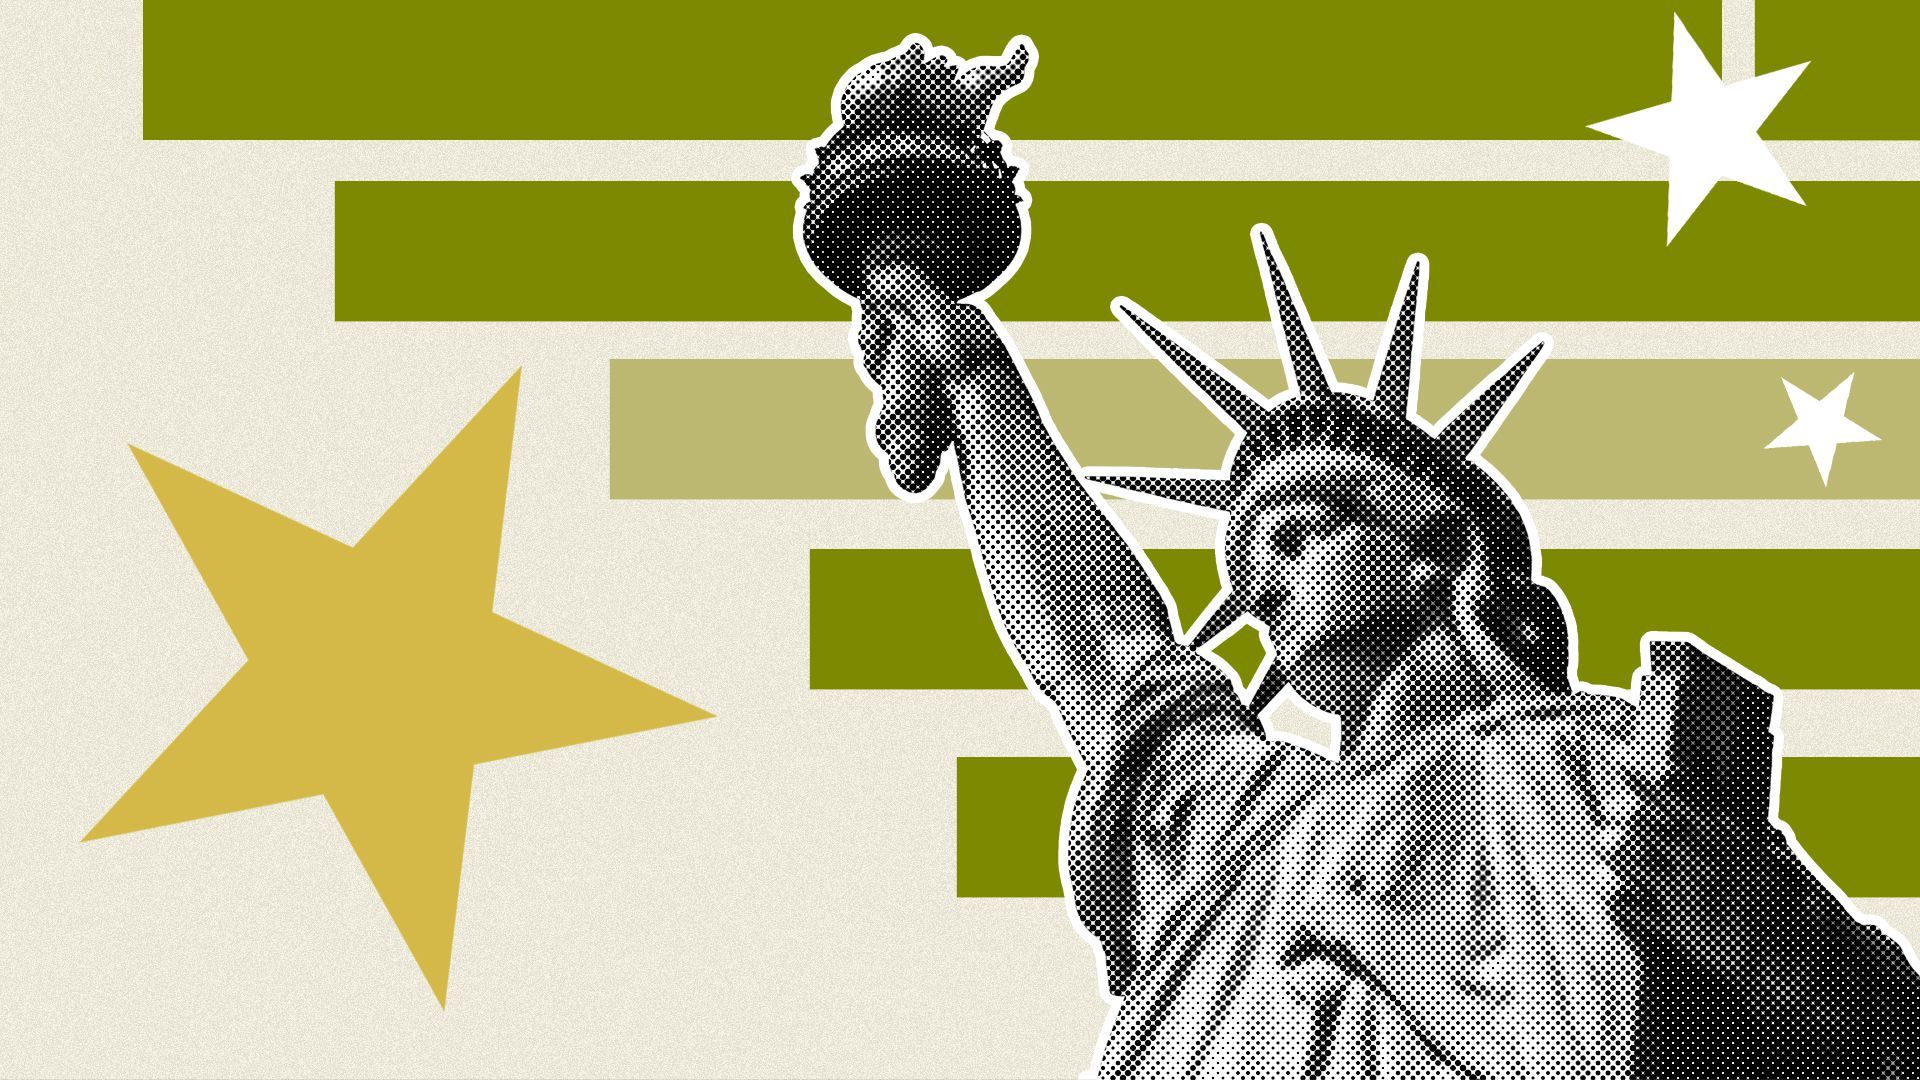 Illustration of the statue of liberty with stripes and stars.